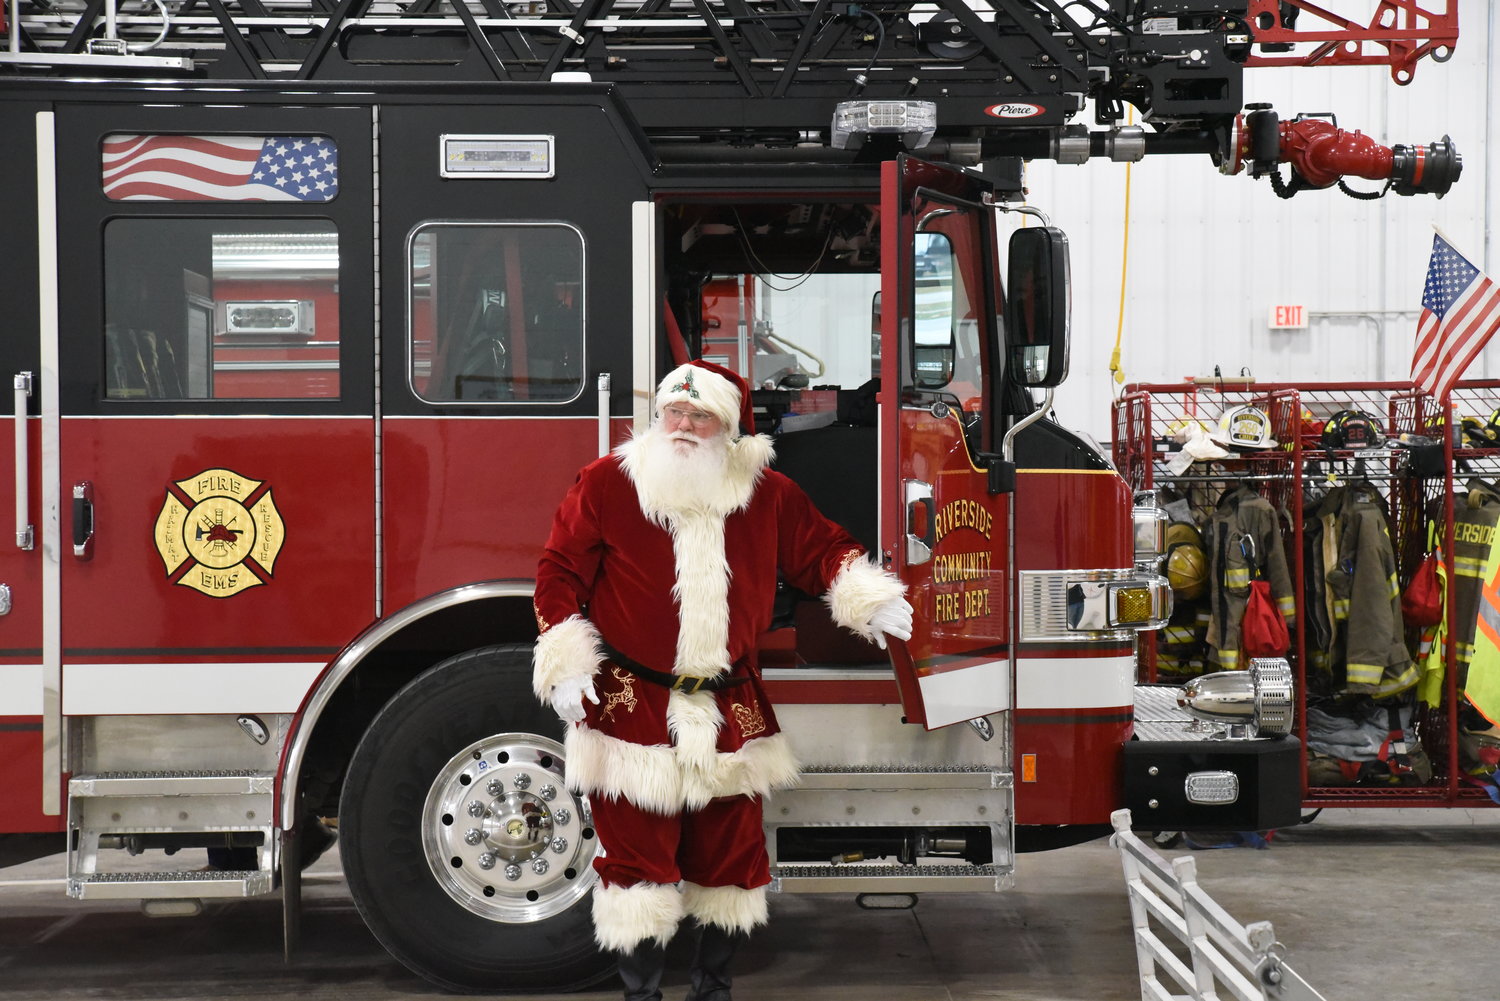 Santa skipped the sleigh and rode in a Riverside Fire Department truck to get to the fire station where he was greeted by dozens of children.